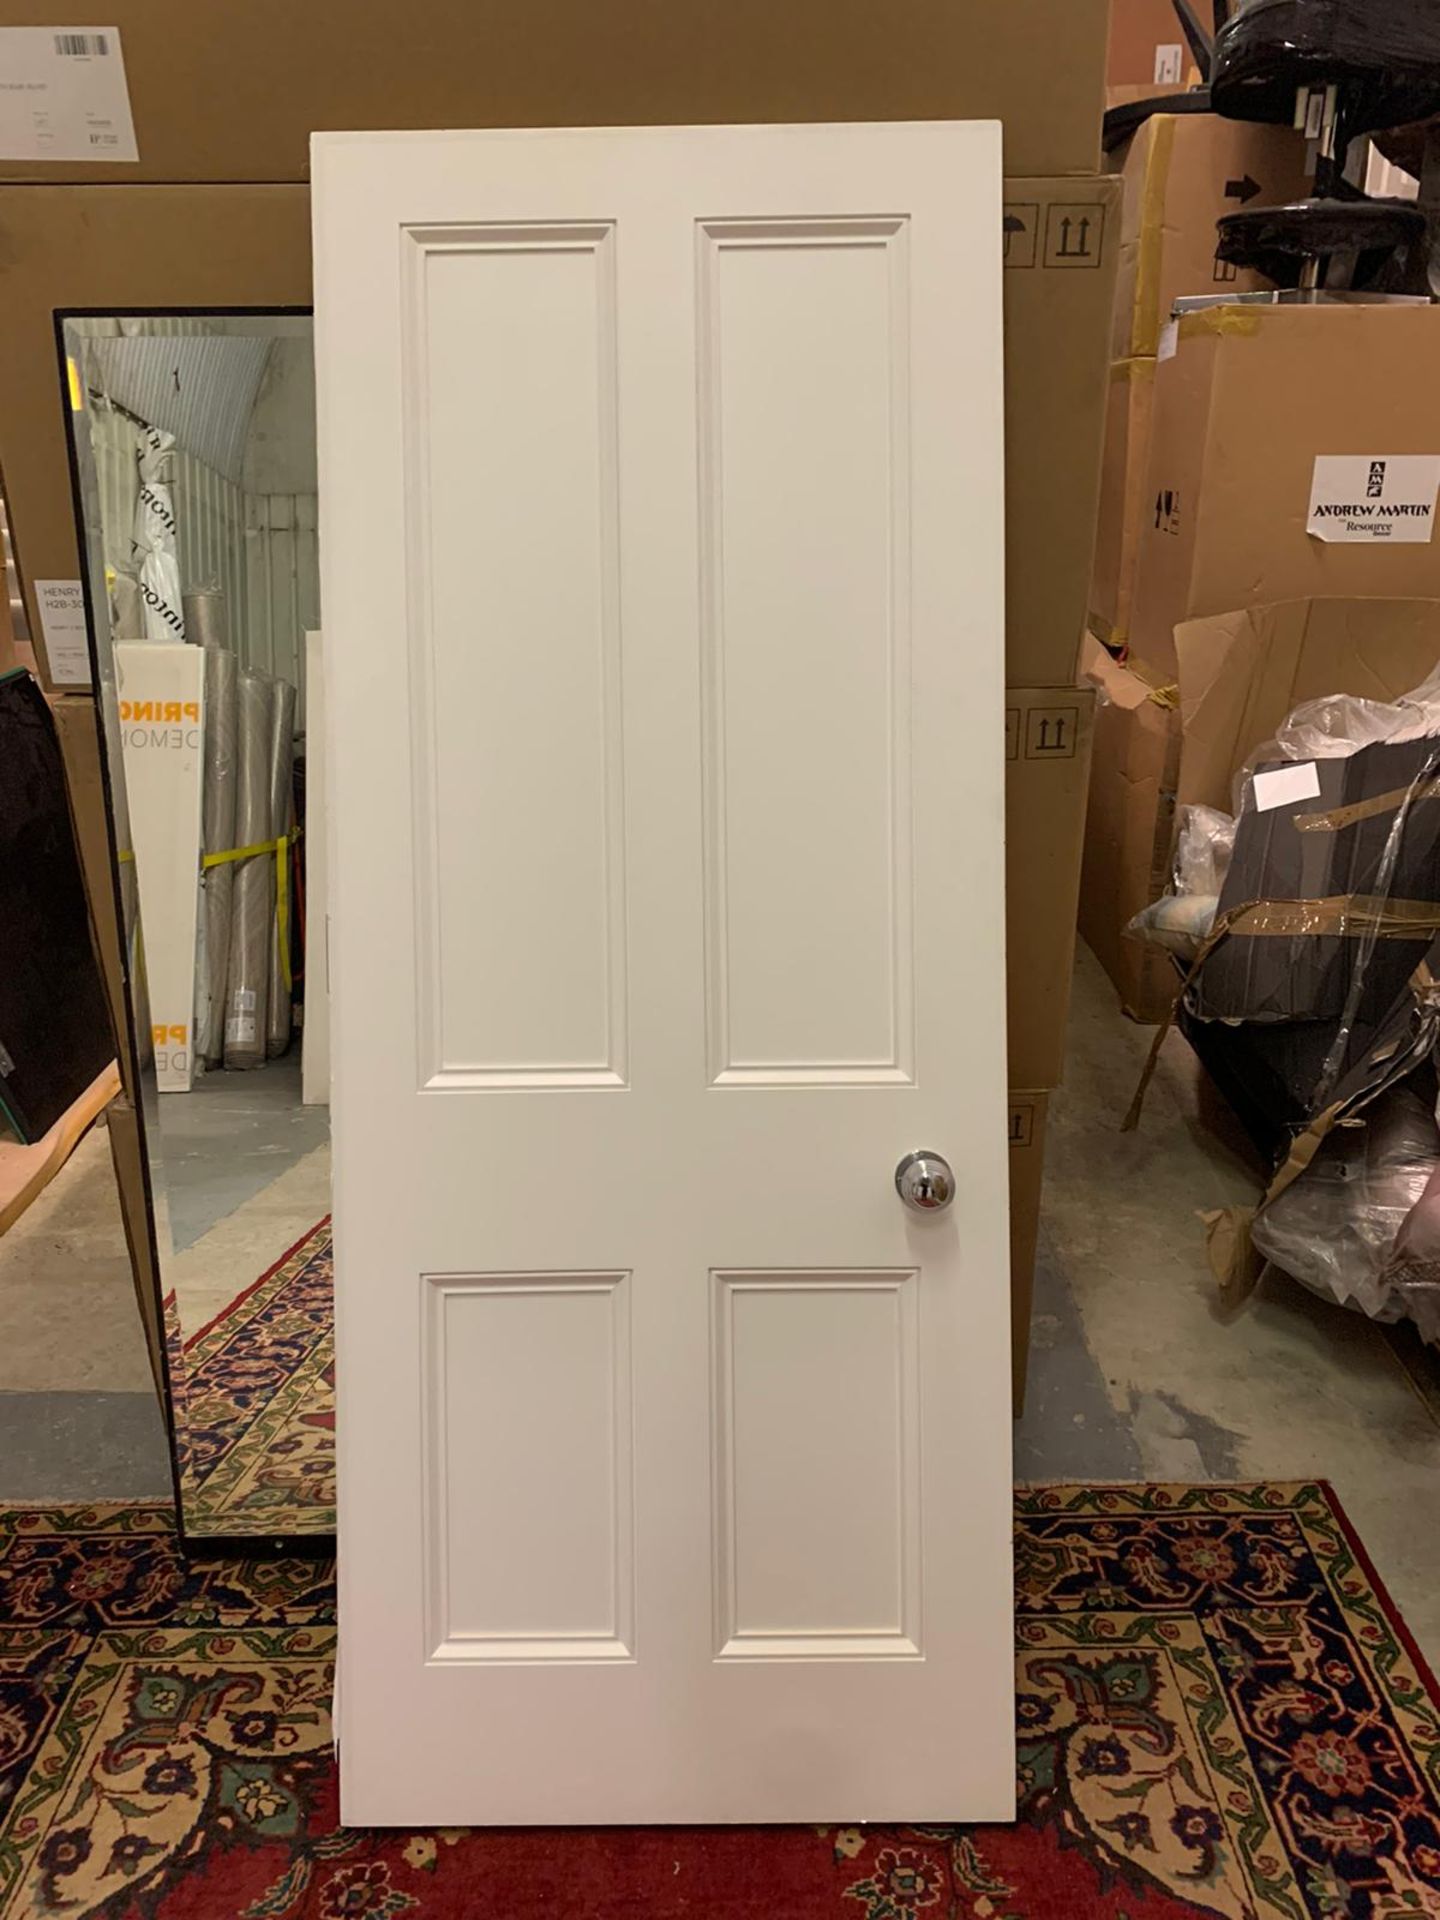 Set Of Two White Fire Doors Complete With Door Frame Each Door 83cm X 206cm X 5cm Consigned From A